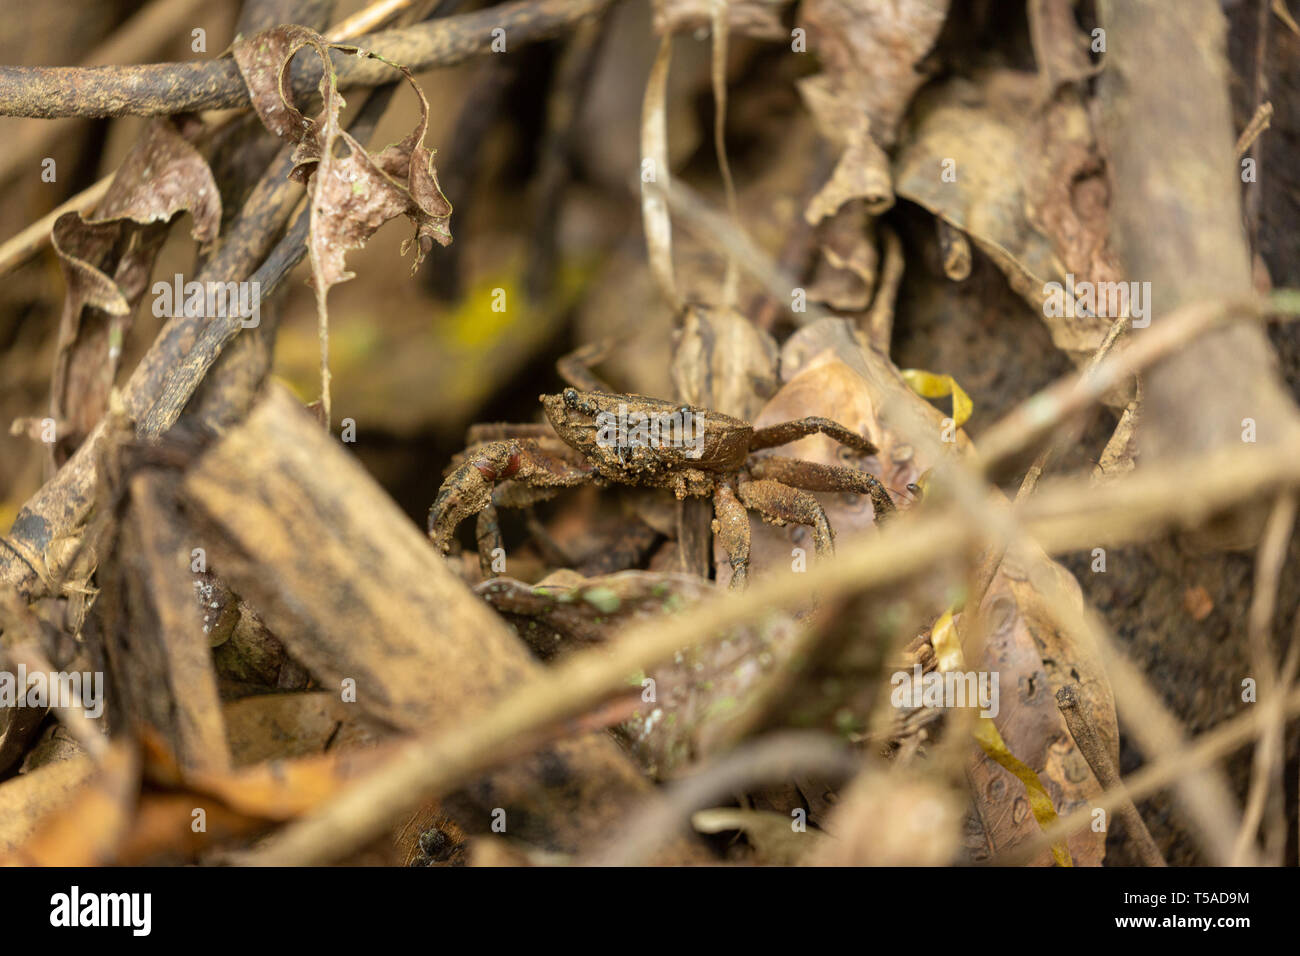 Freshwater forest crab camouflaged on the forest floor in the leaf litter Stock Photo